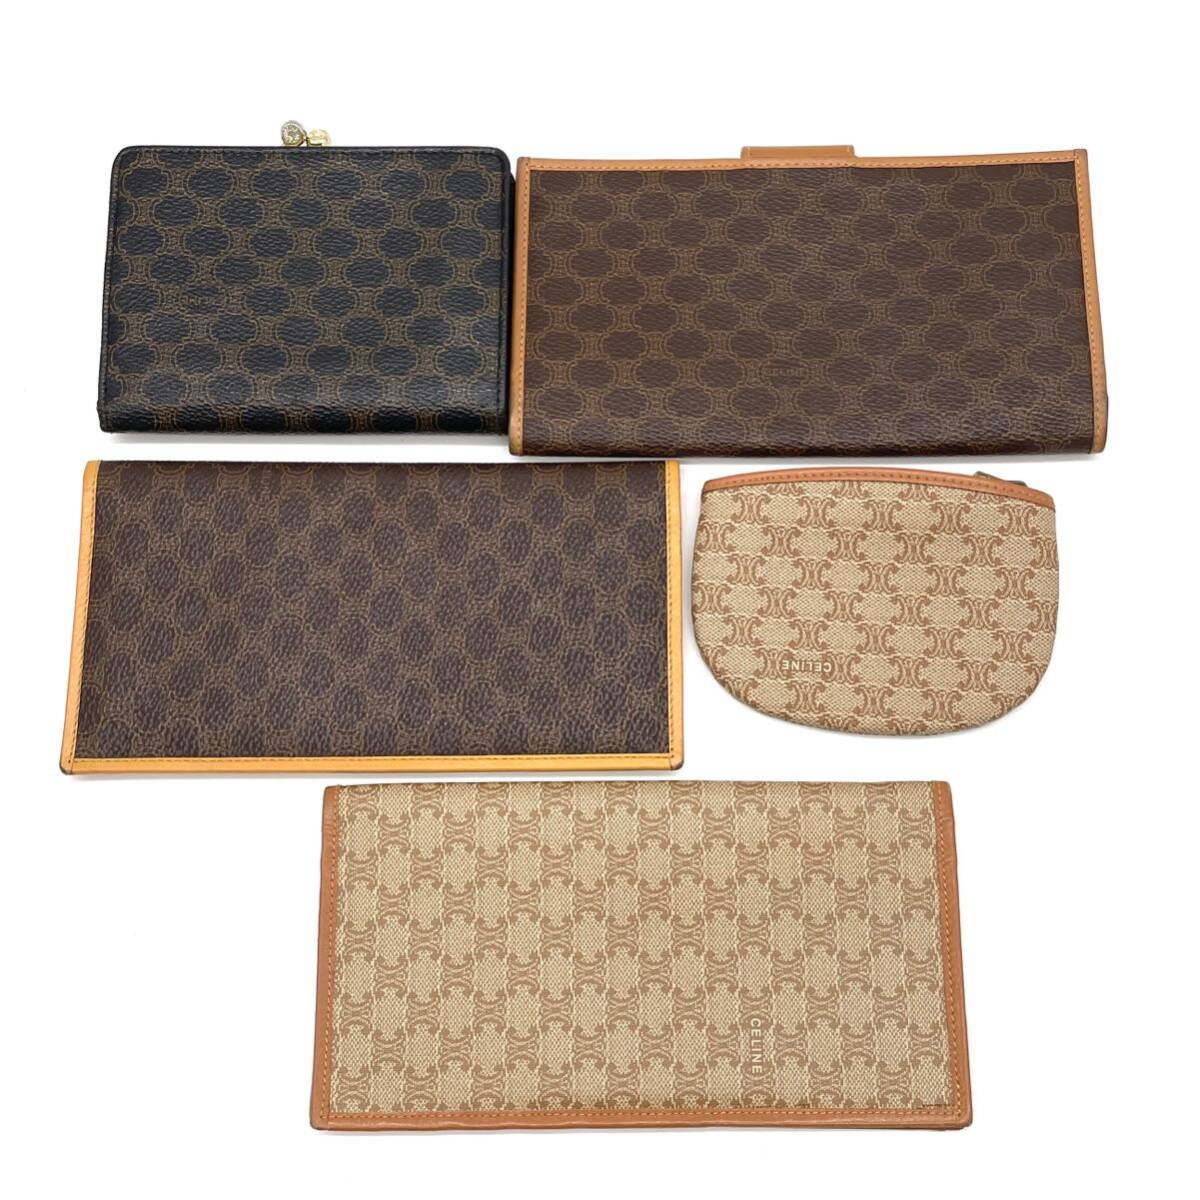 1 jpy all superior article and more set sale CELINE Celine Macadam Brown black Trio mf long wallet folding purse coin case 5 point set 